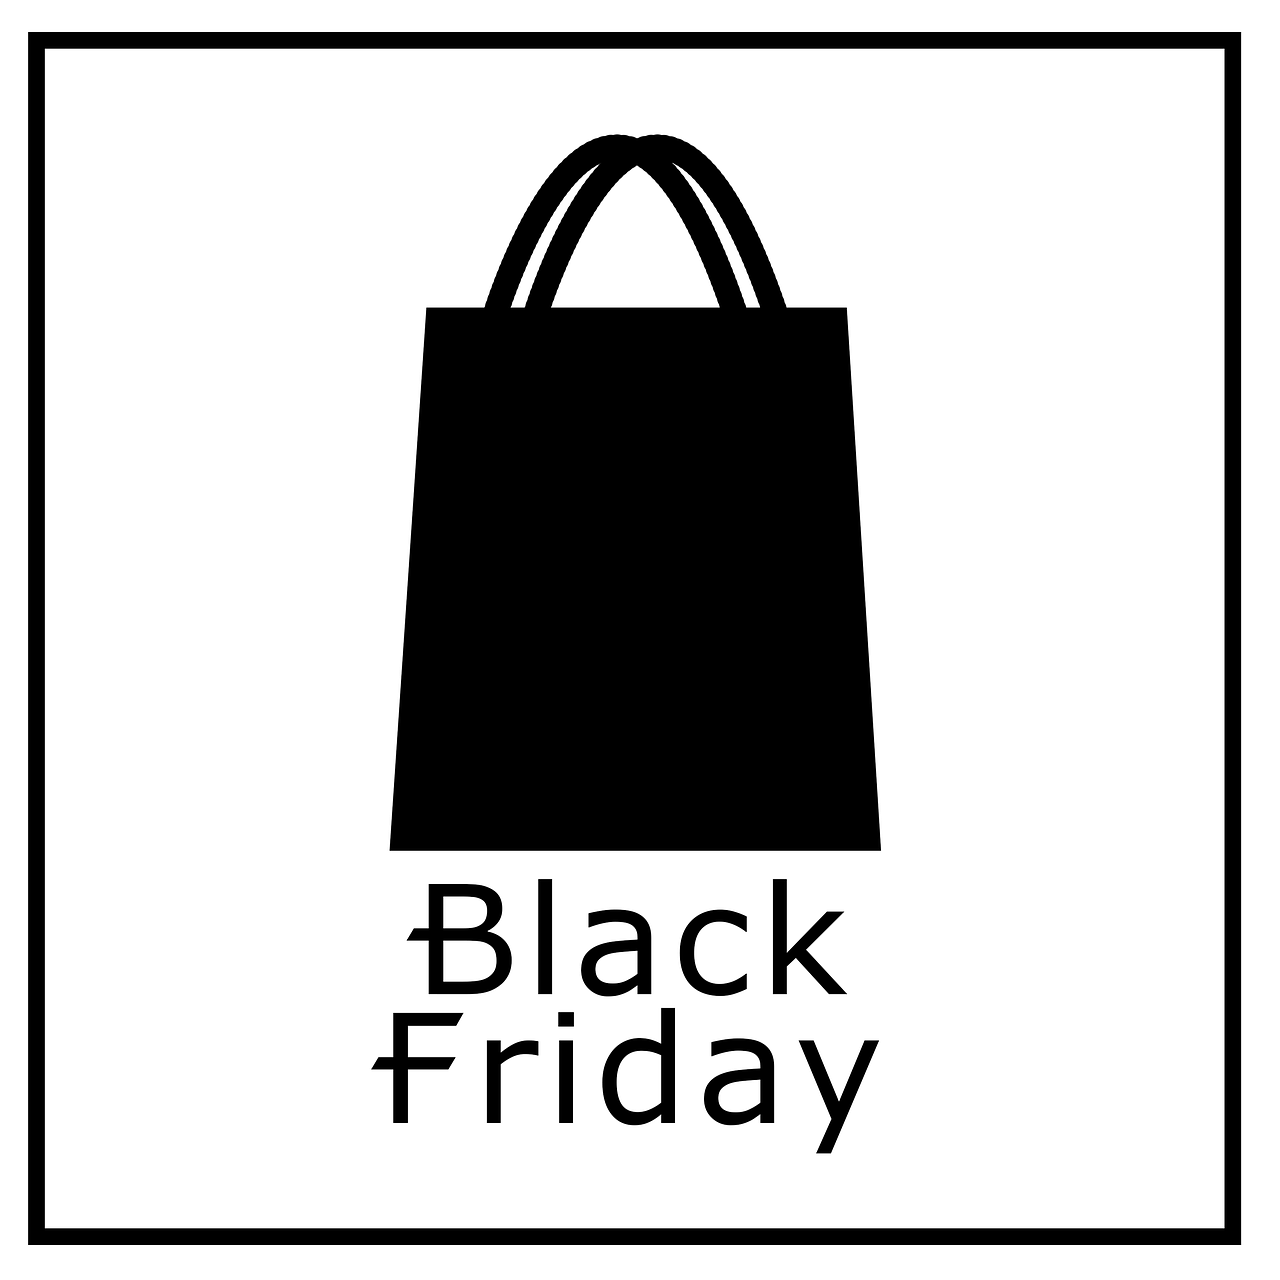 black friday discounts discount free photo